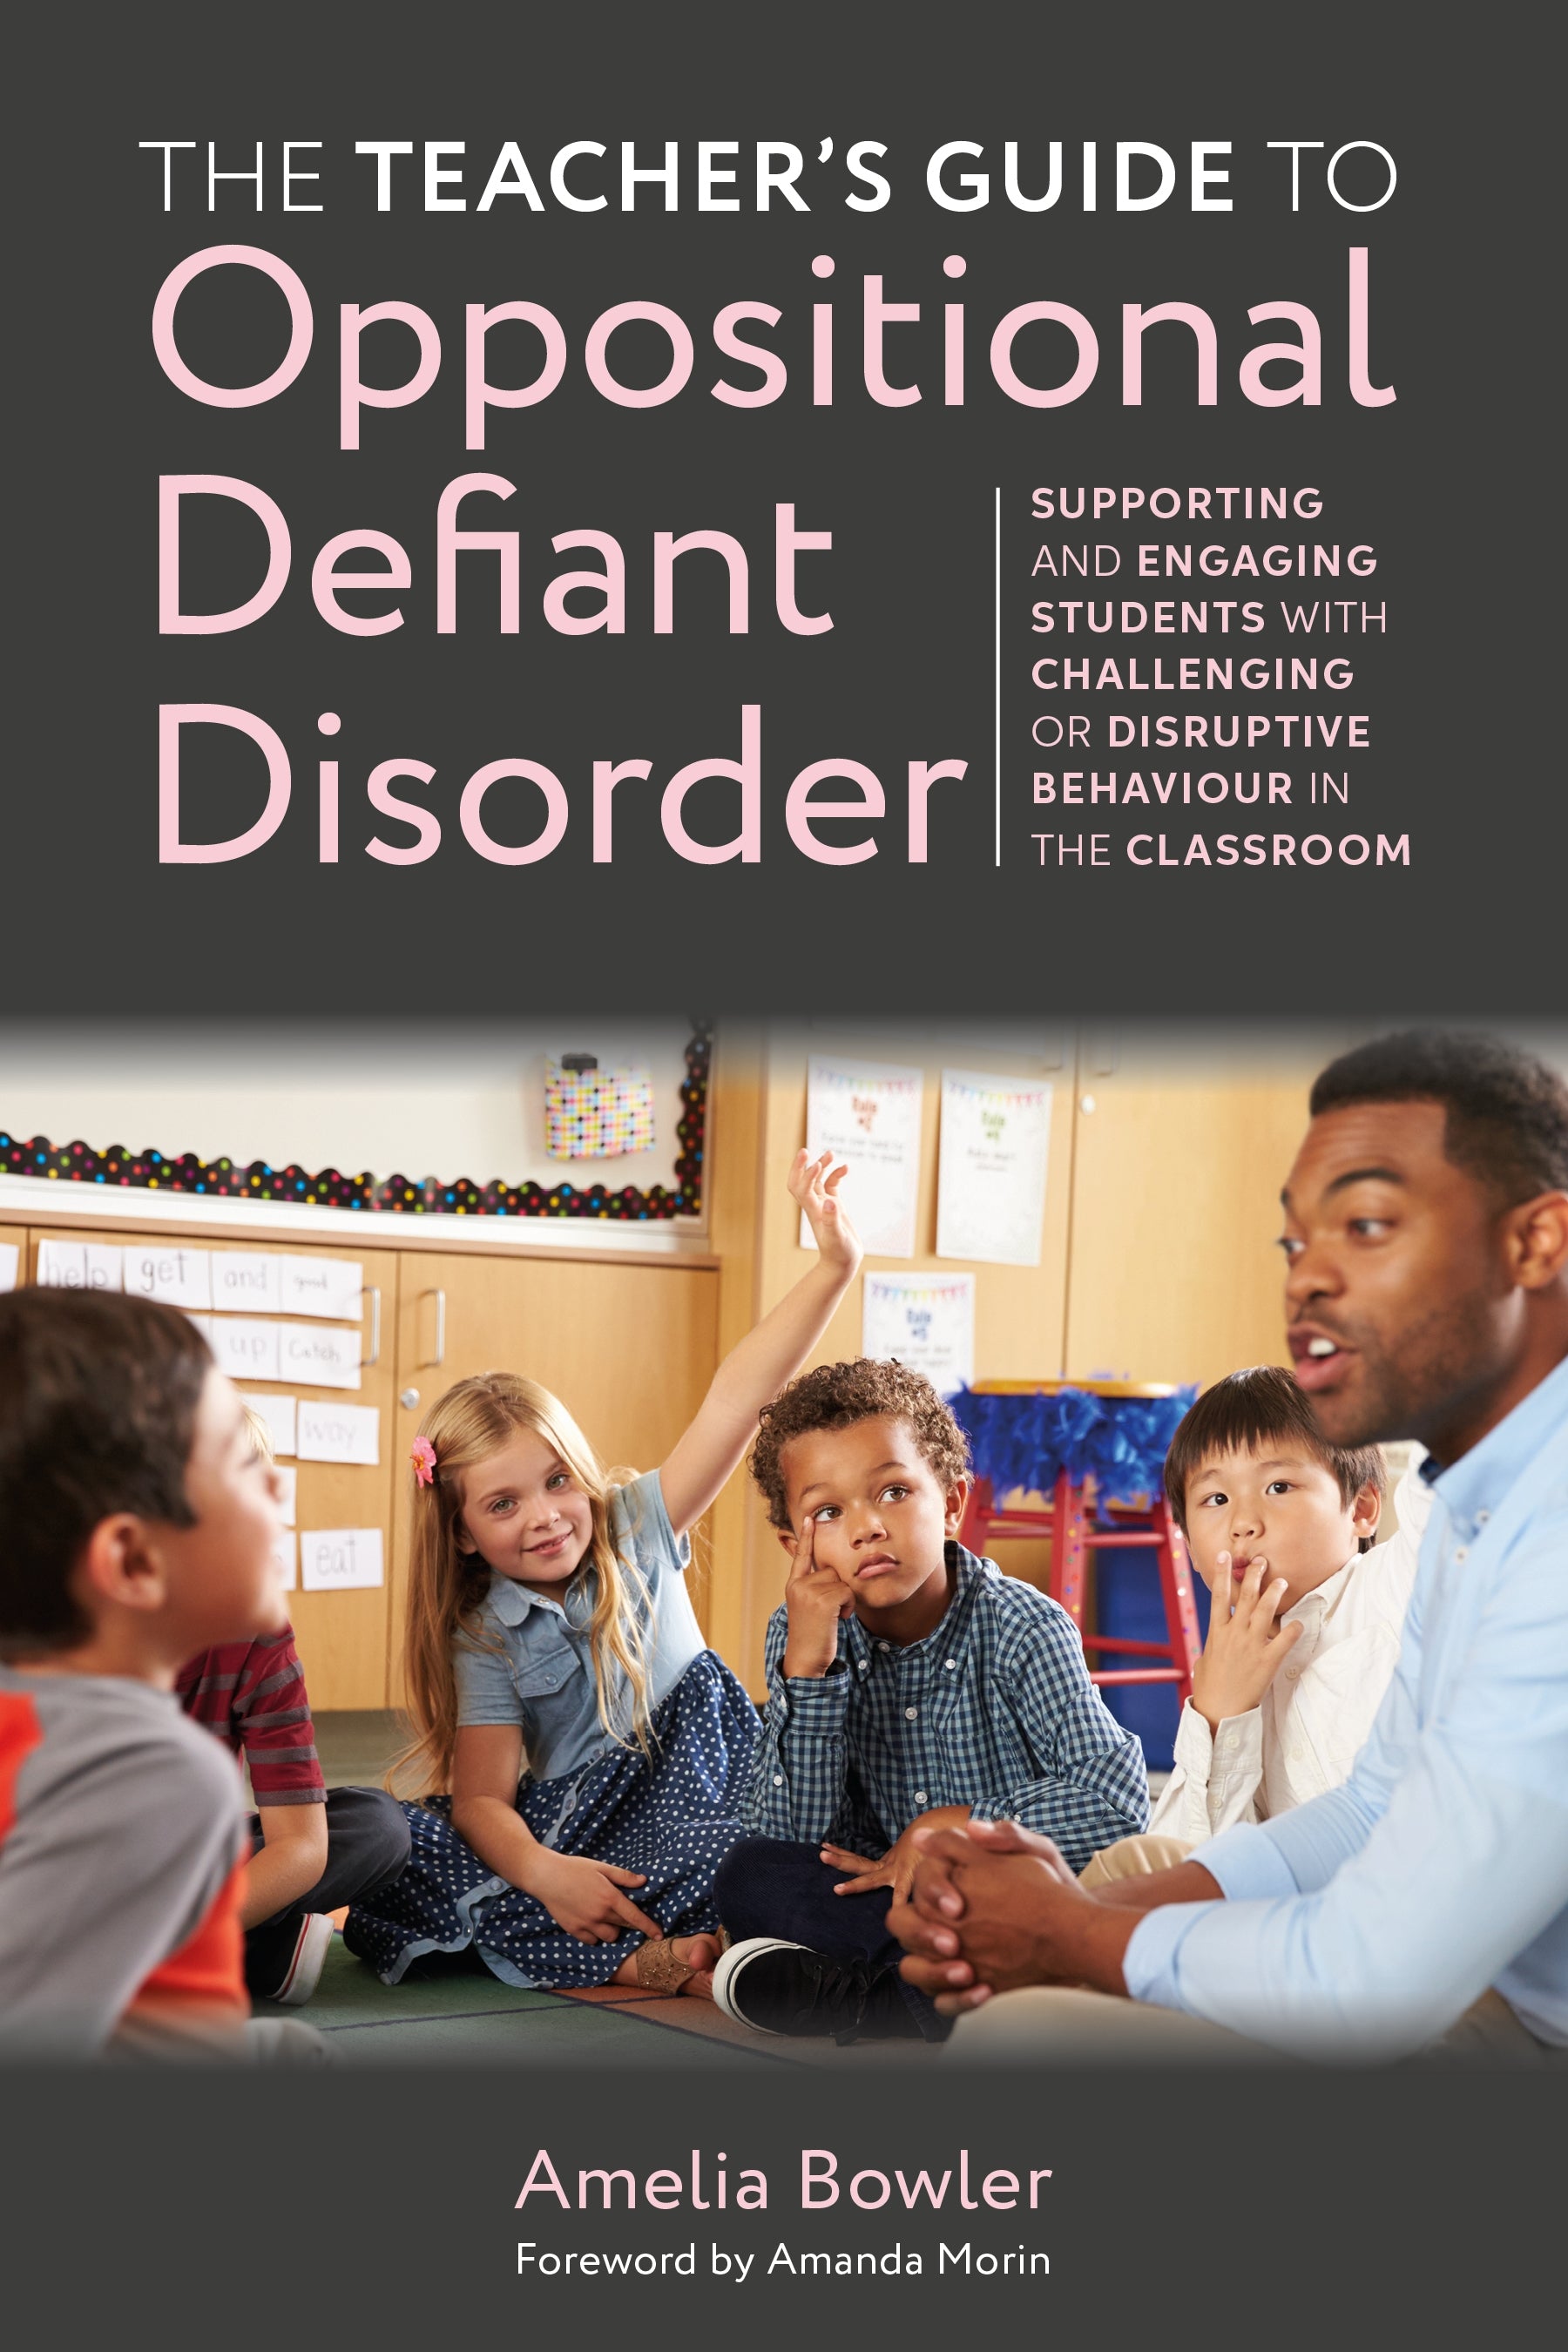 The Teacher's Guide to Oppositional Defiant Disorder by Amanda Morin, Amelia Bowler